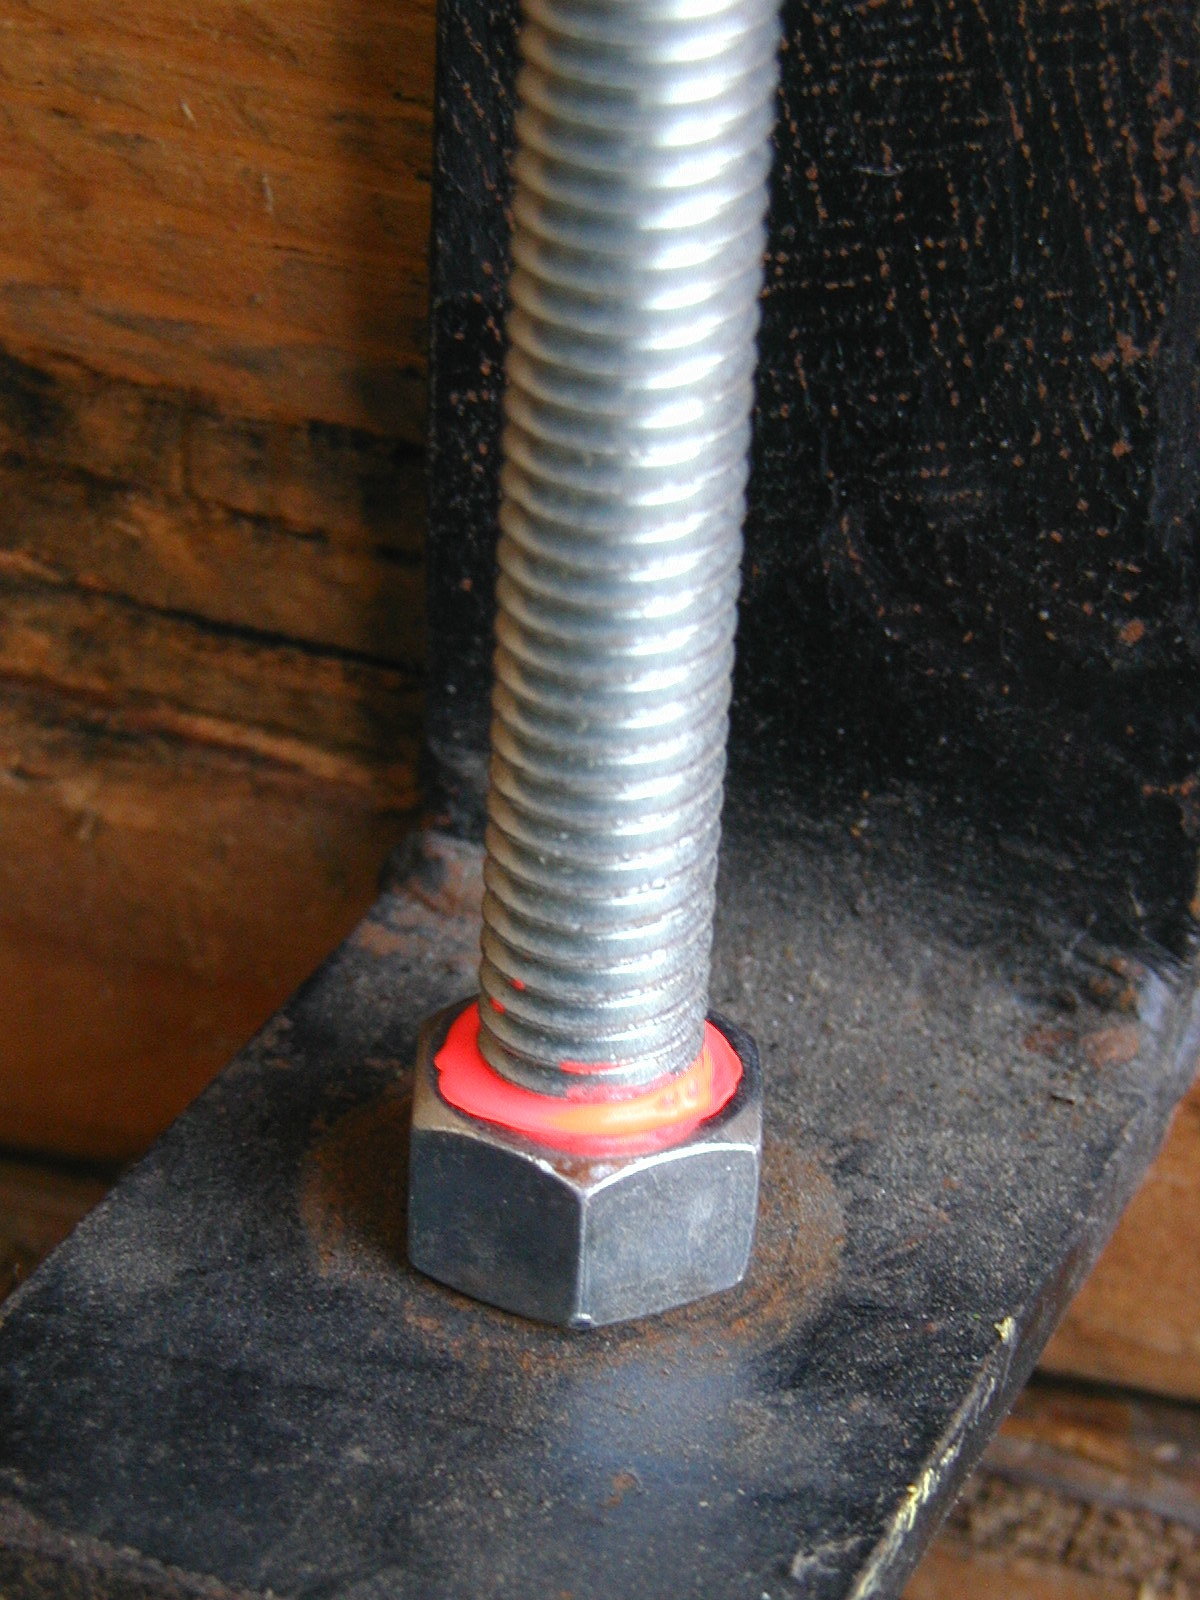  Image of bolt with nut at bottom striped with Metron Bright Orange paint to demonstrate use as tamper resistant, torque seal, or torque stripe.
